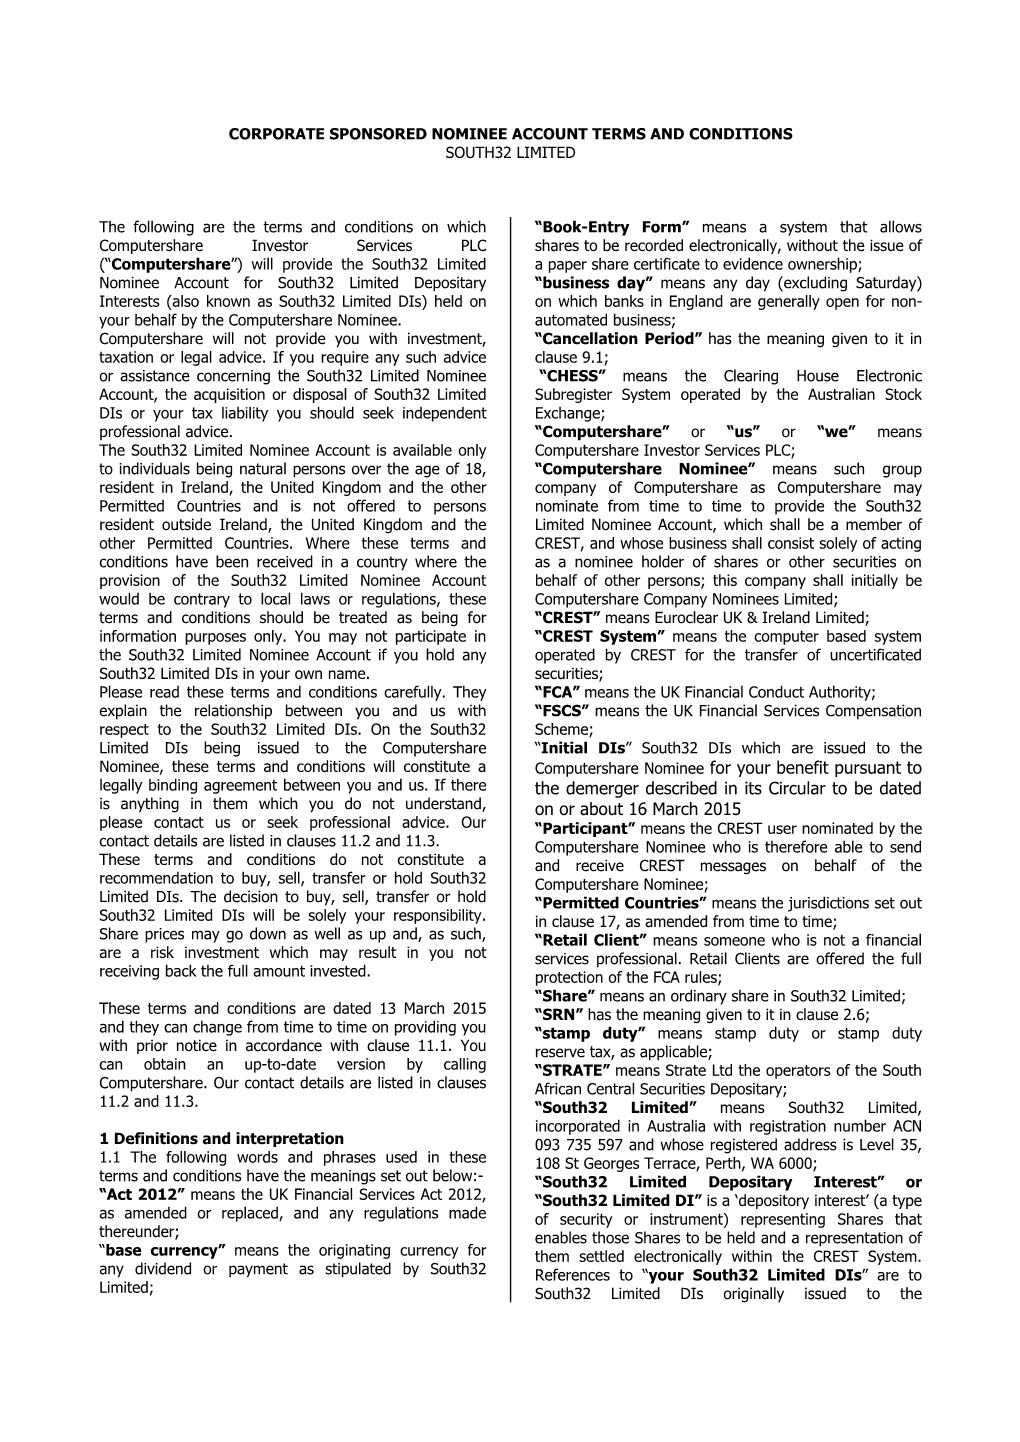 Computershare Nominee for Your Benefit Pursuant to the Demerger Described in Its Circular to Be Dated on Or About 16 March 2015